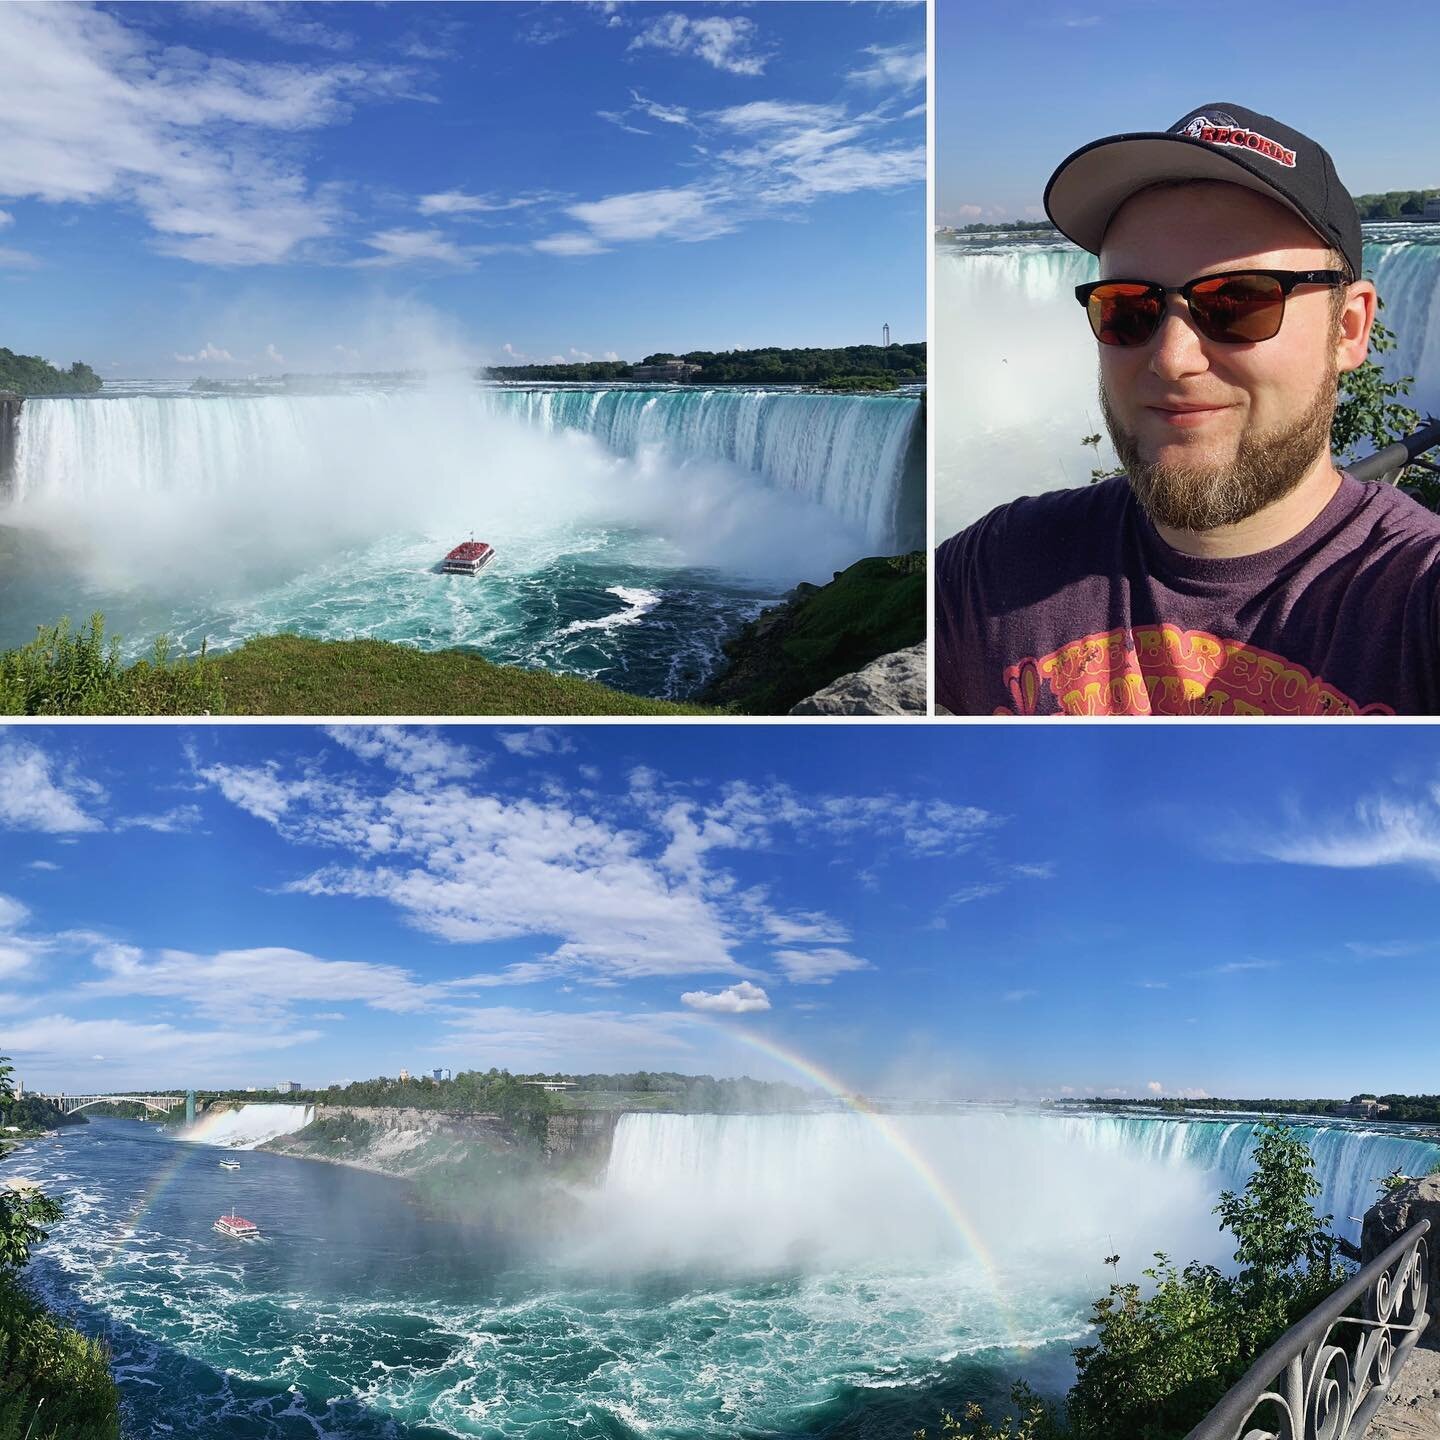 These are just a few of the absolutely countless breathtaking views I was able to grab at the legendary Niagara Falls on a recent gig. While this wasn&rsquo;t my first time visiting the area, it WAS my first time finally getting to see the falls from